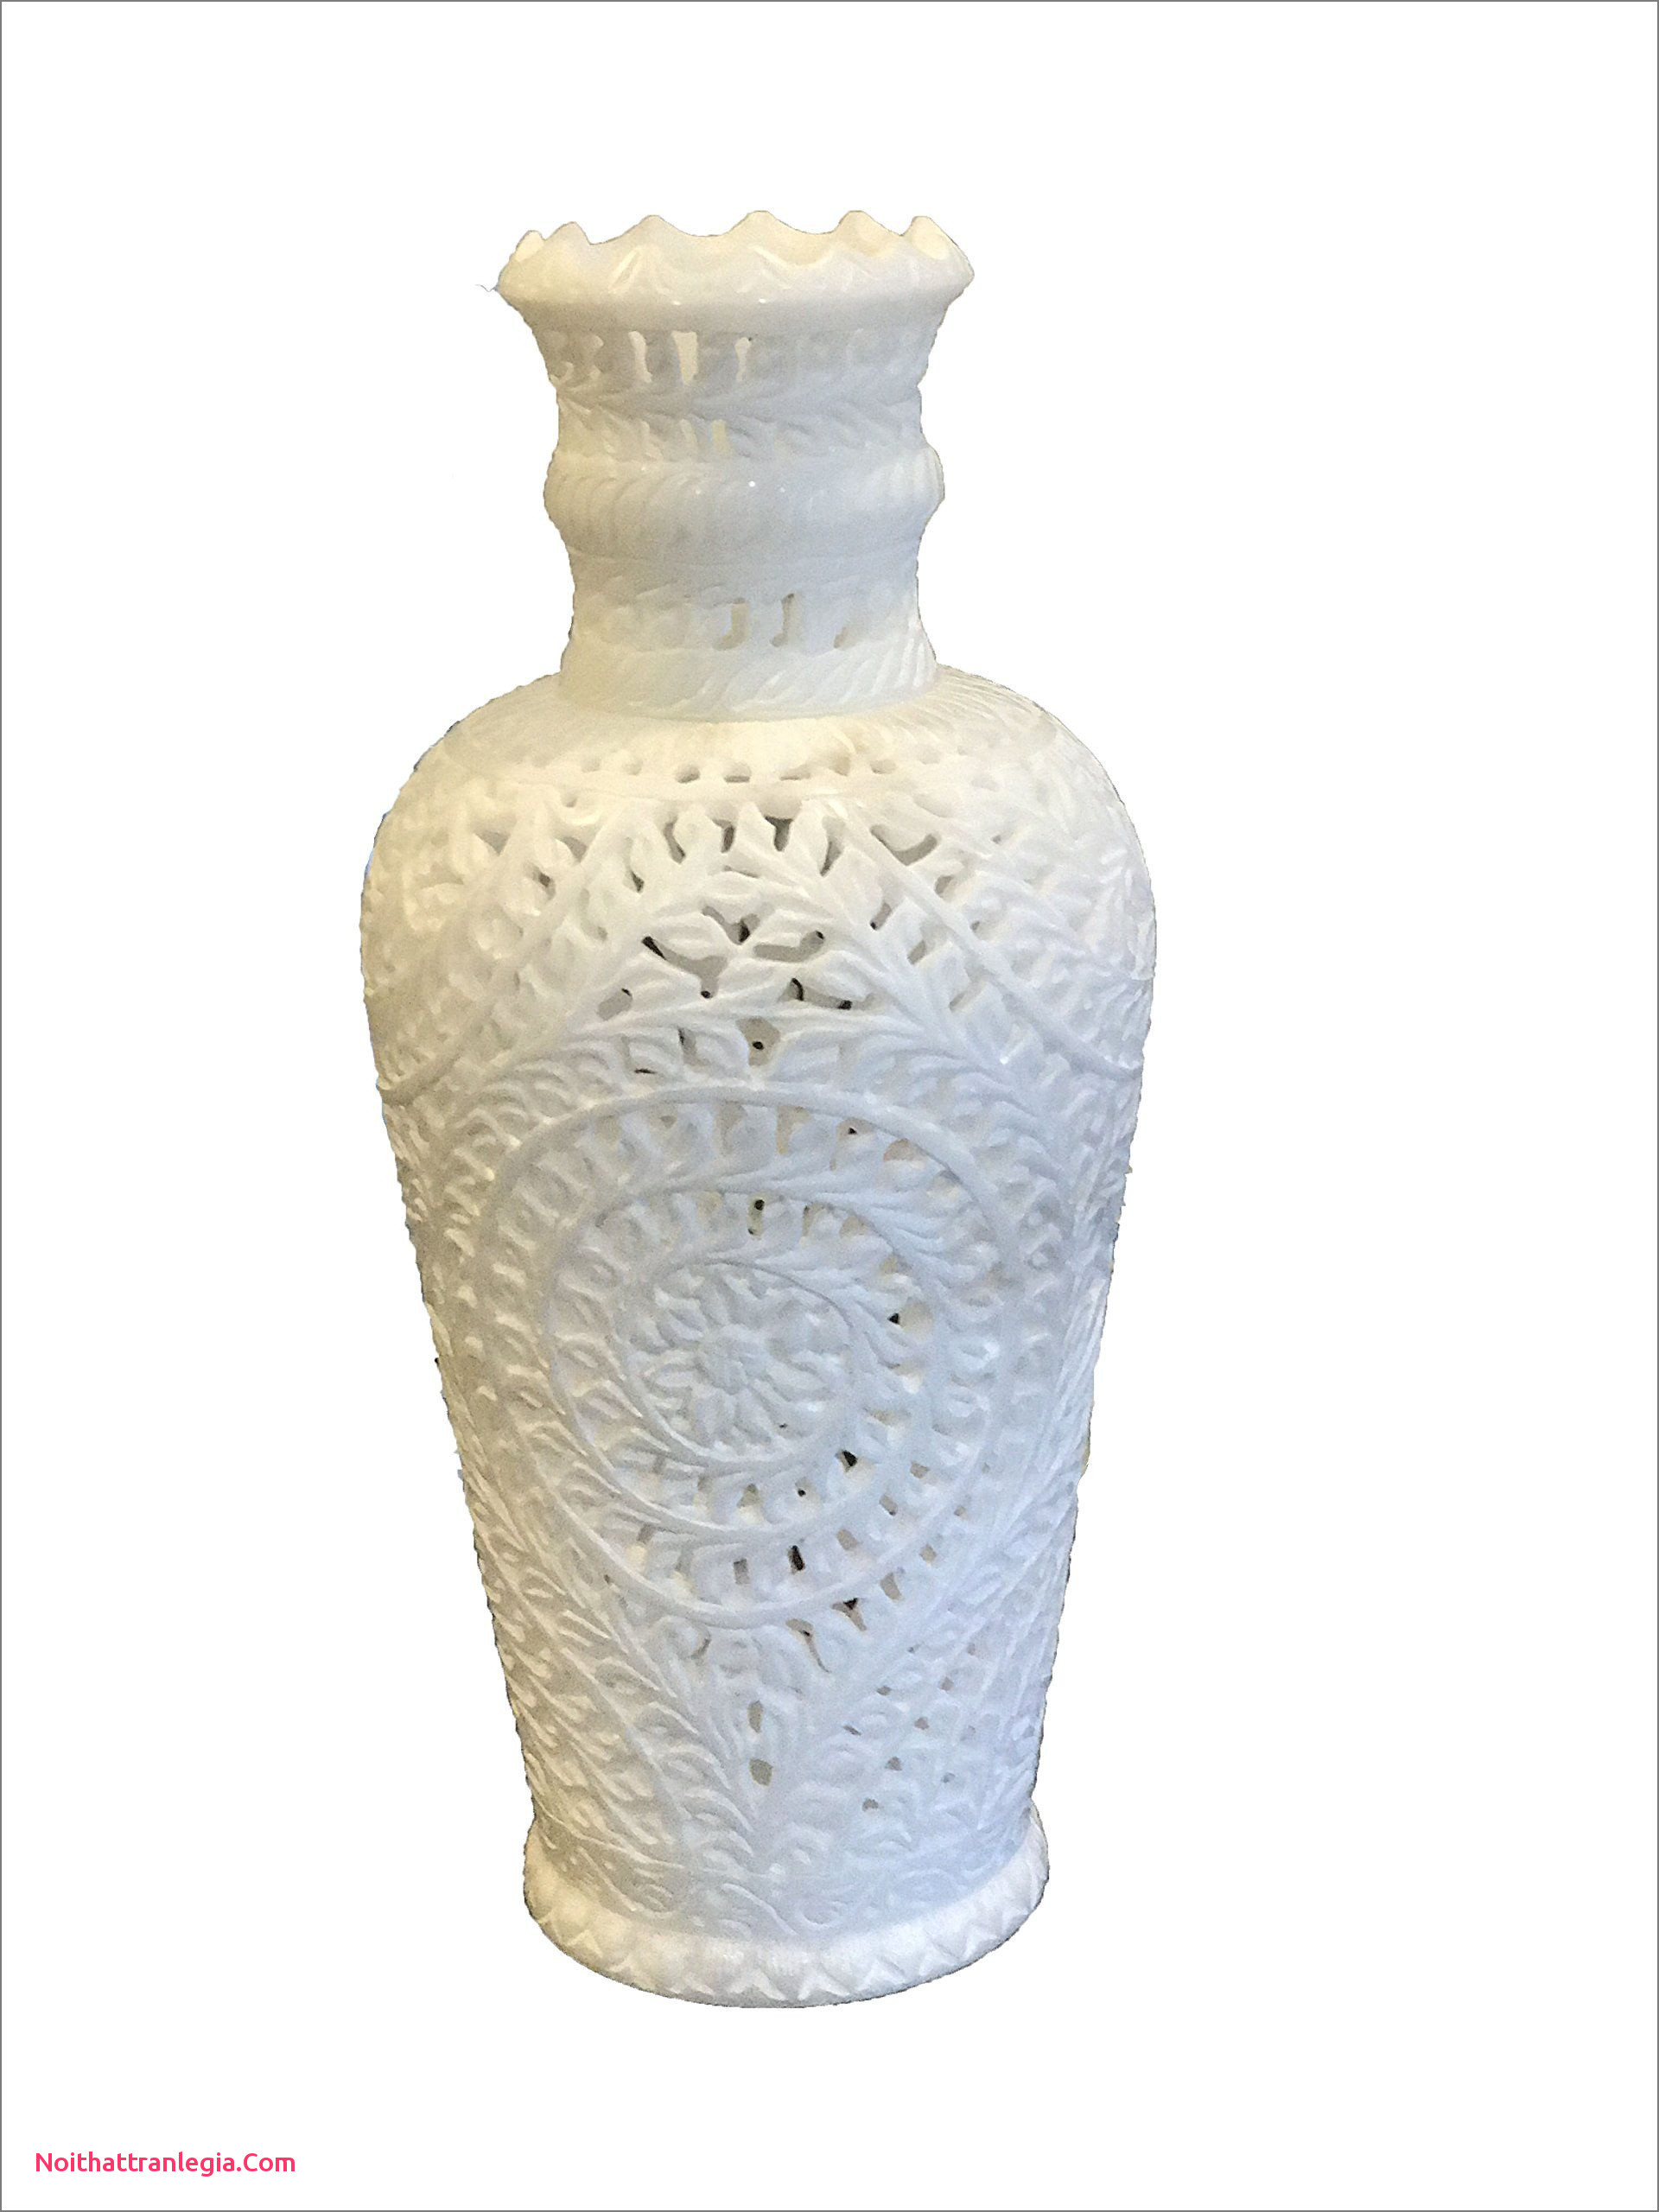 26 Great Large White Ceramic Vase 2024 free download large white ceramic vase of 20 how to clean flower vases noithattranlegia vases design pertaining to white marble flower vase handcrafted stone decorative wedding diy vases handcrafted by ar